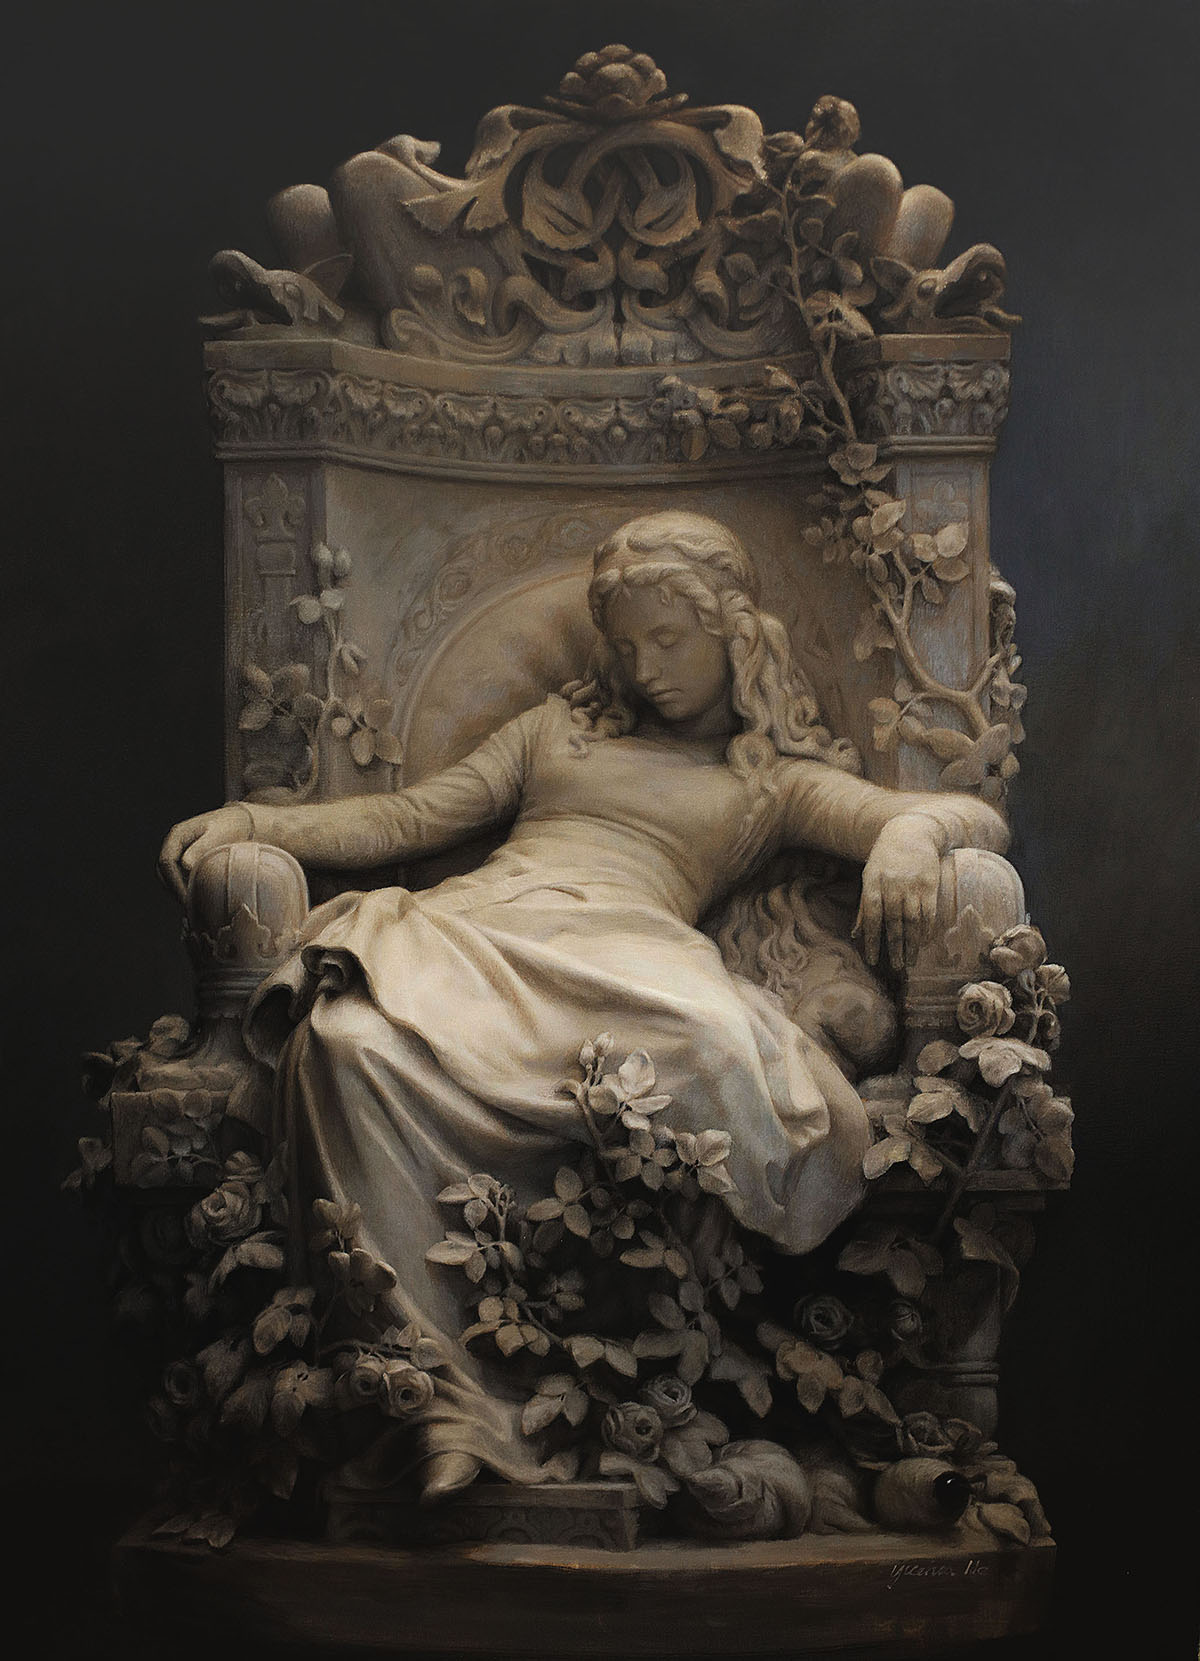 oil painting of a statue of a women sleeping in a decorated seat